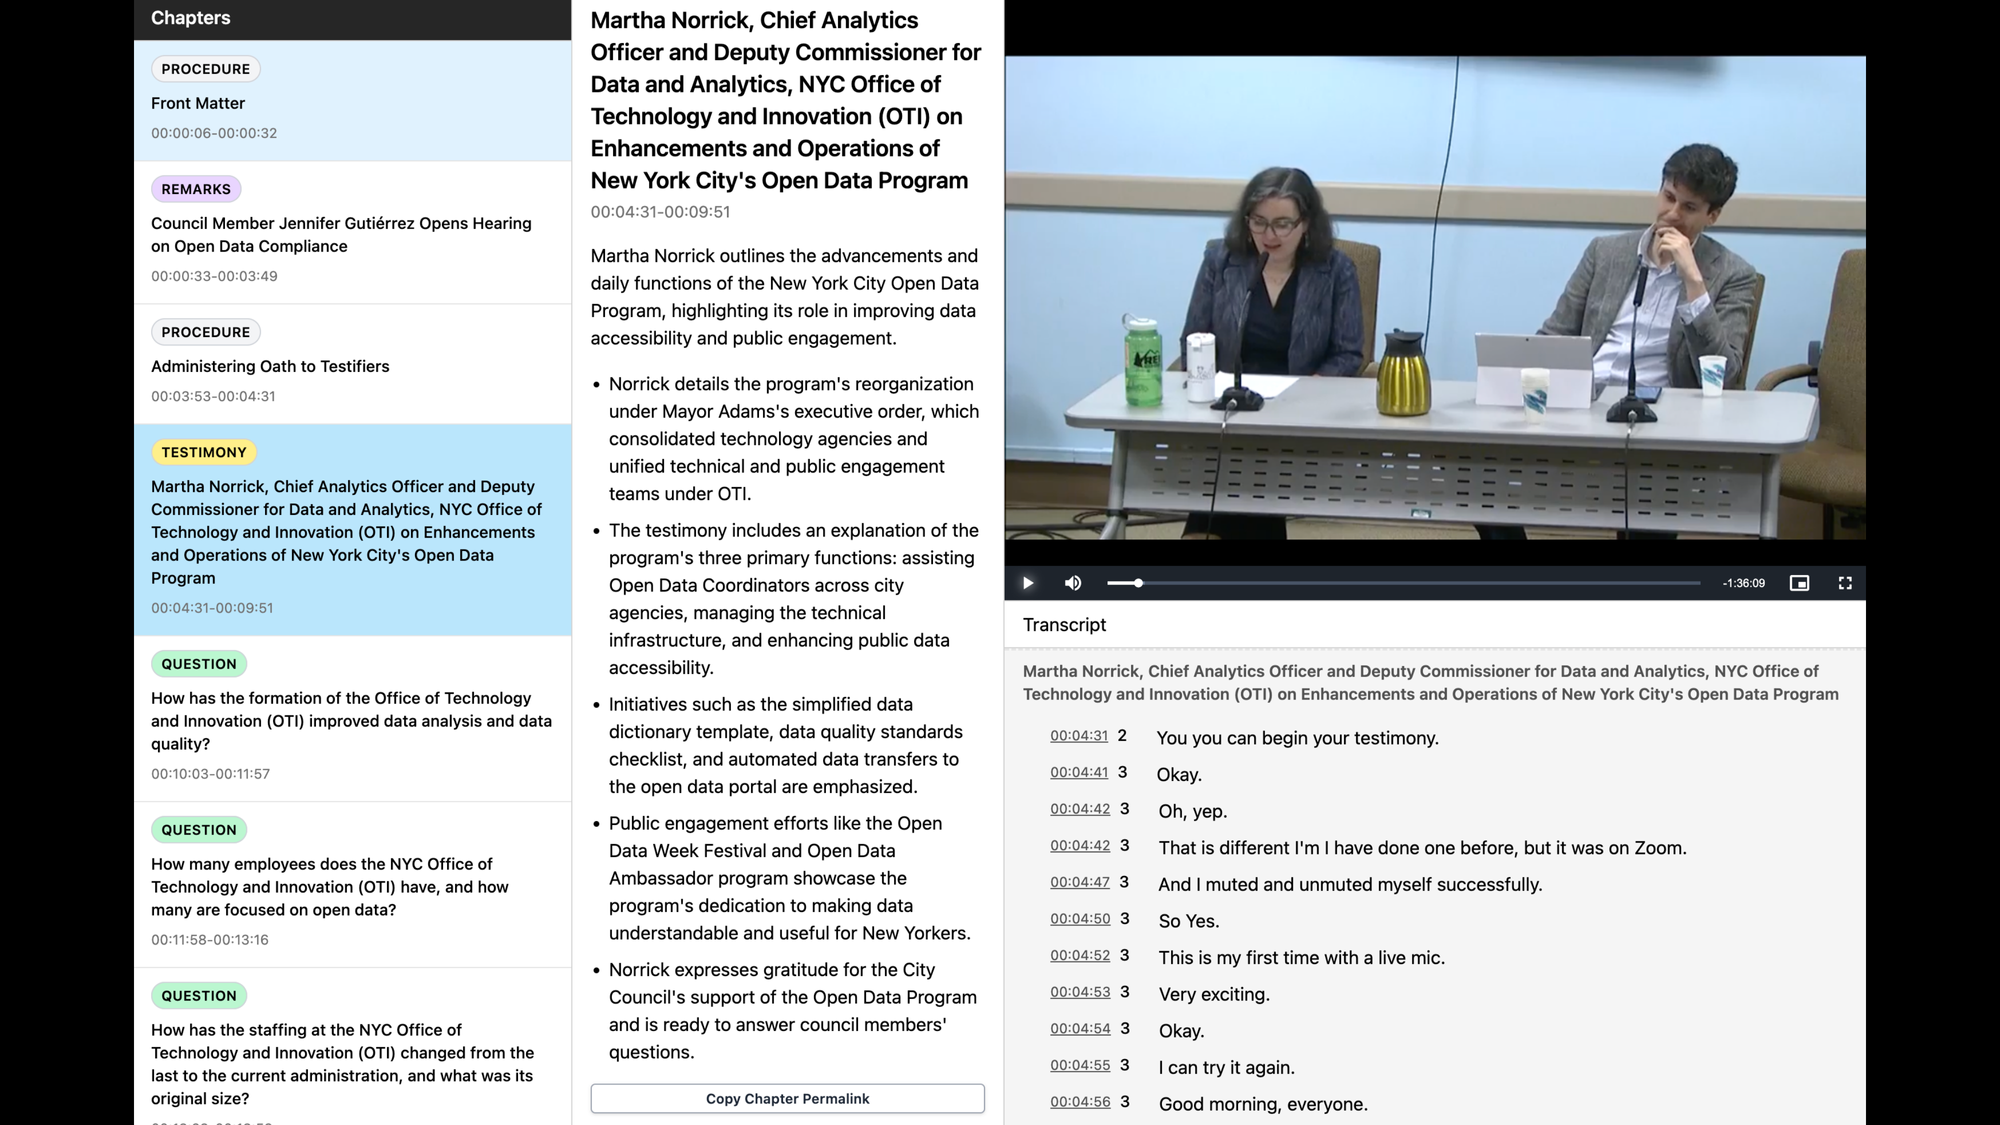 A screenshot of a Committee on Technology meeting on Open Data Compliance in the NYC City Council on citymeetings.nyc. There are three columns. The first two columns take up one half of the screen. The first column contains a list of chapters labeled as PROCEDURE, REMARKS, TESTIMONY, or QUESTION. Currently selected is a TESTIMONY chapter titled: Martha Norrick, Chief Analytics Officer and Deputy Commissioner for Data and Analytics, NYC Office of Technology and Innovation (OTI) on Enhancements and Operations of New York Citys Open Data Program. The second column shows the chapter title and a summary of its contents. The third column is divided in two equally-sized horizontal sections. The upper half shows a video of the meeting. The still features Martha Norrick, Chief Analytics Officer of NYC, and Zachary Feder, the Open Data Program Manager. The bottom half features the transcript, which is headed with the current chapter title and has a line for every sentence spoken, with timestamps to the left of each sentence.